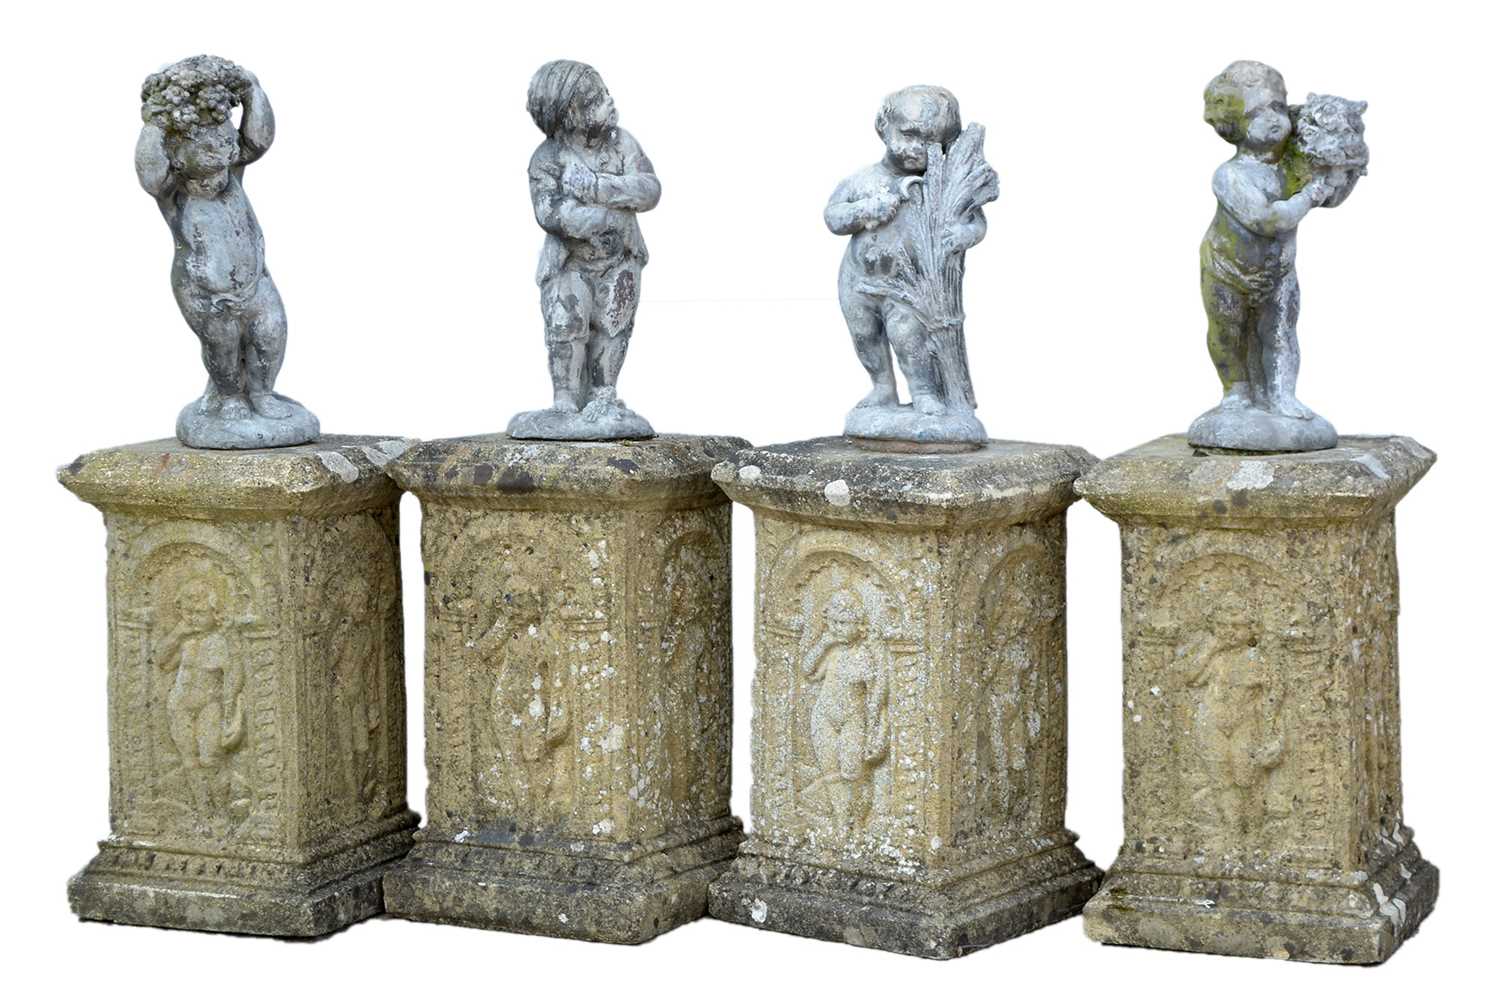 Lot 1188 - Four garden ornaments representing the four seasons